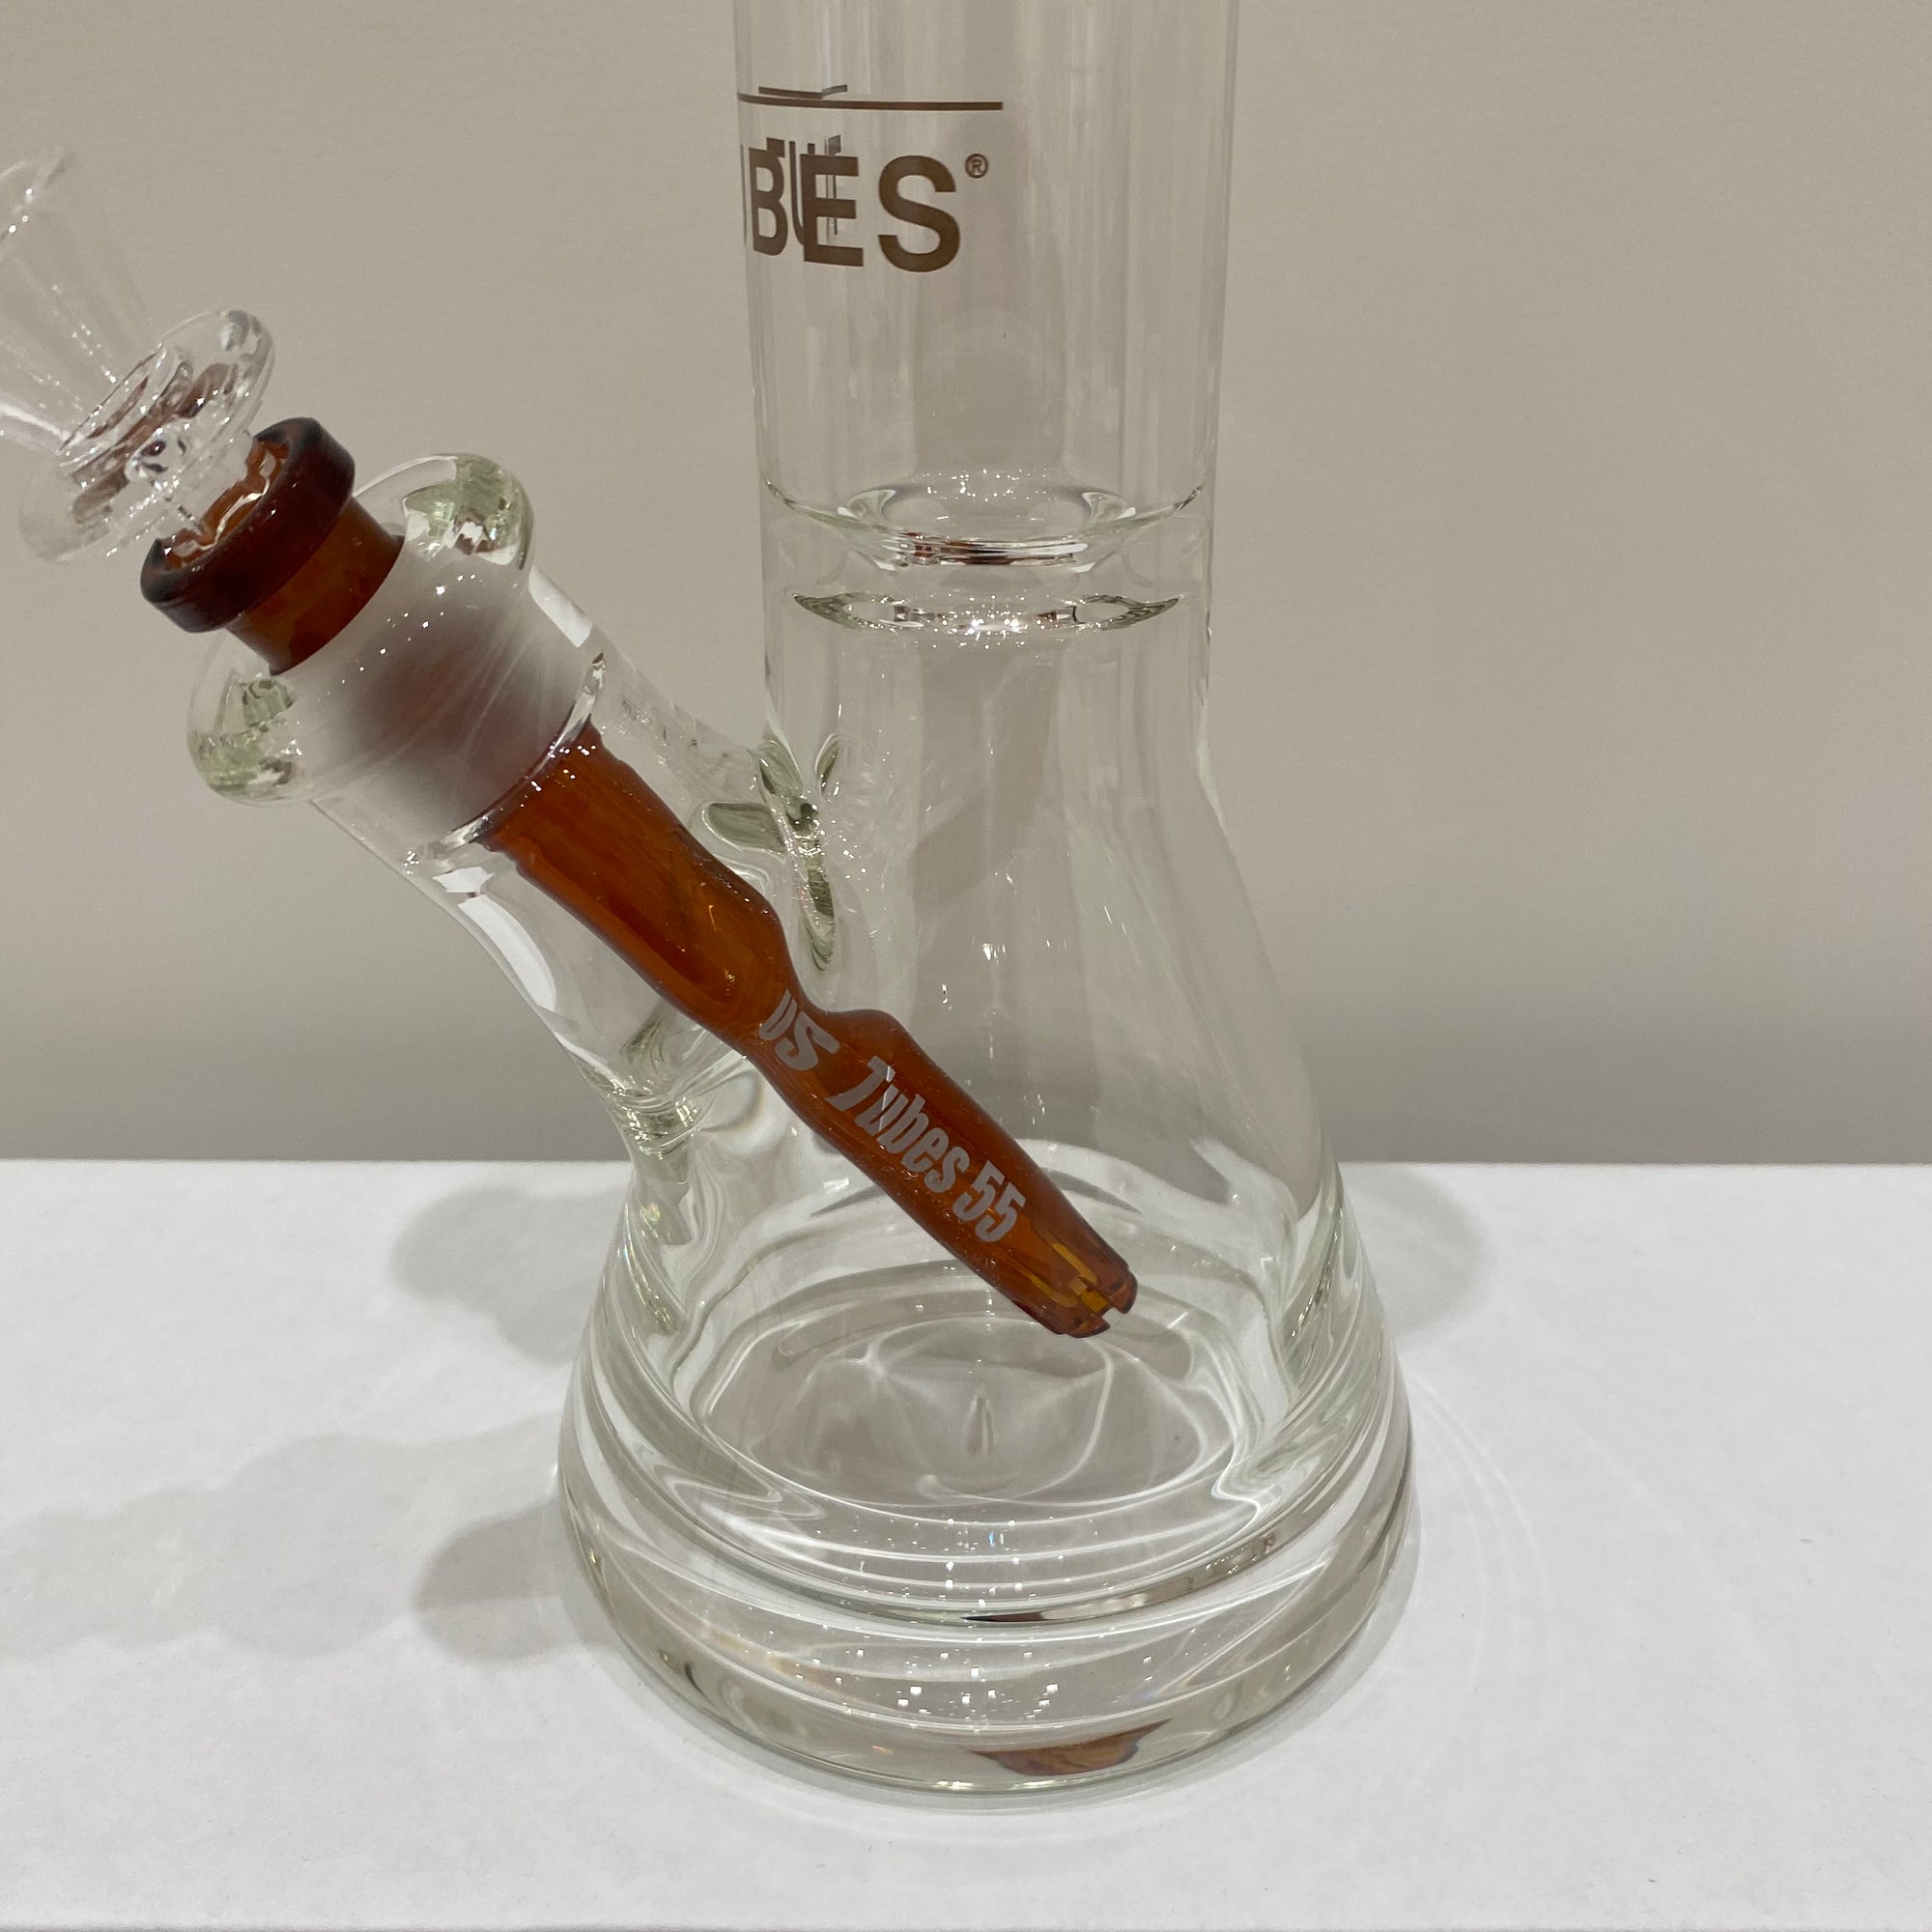 US Tubes Beaker 59, 12 Inch, Constriction, 19mm Joint